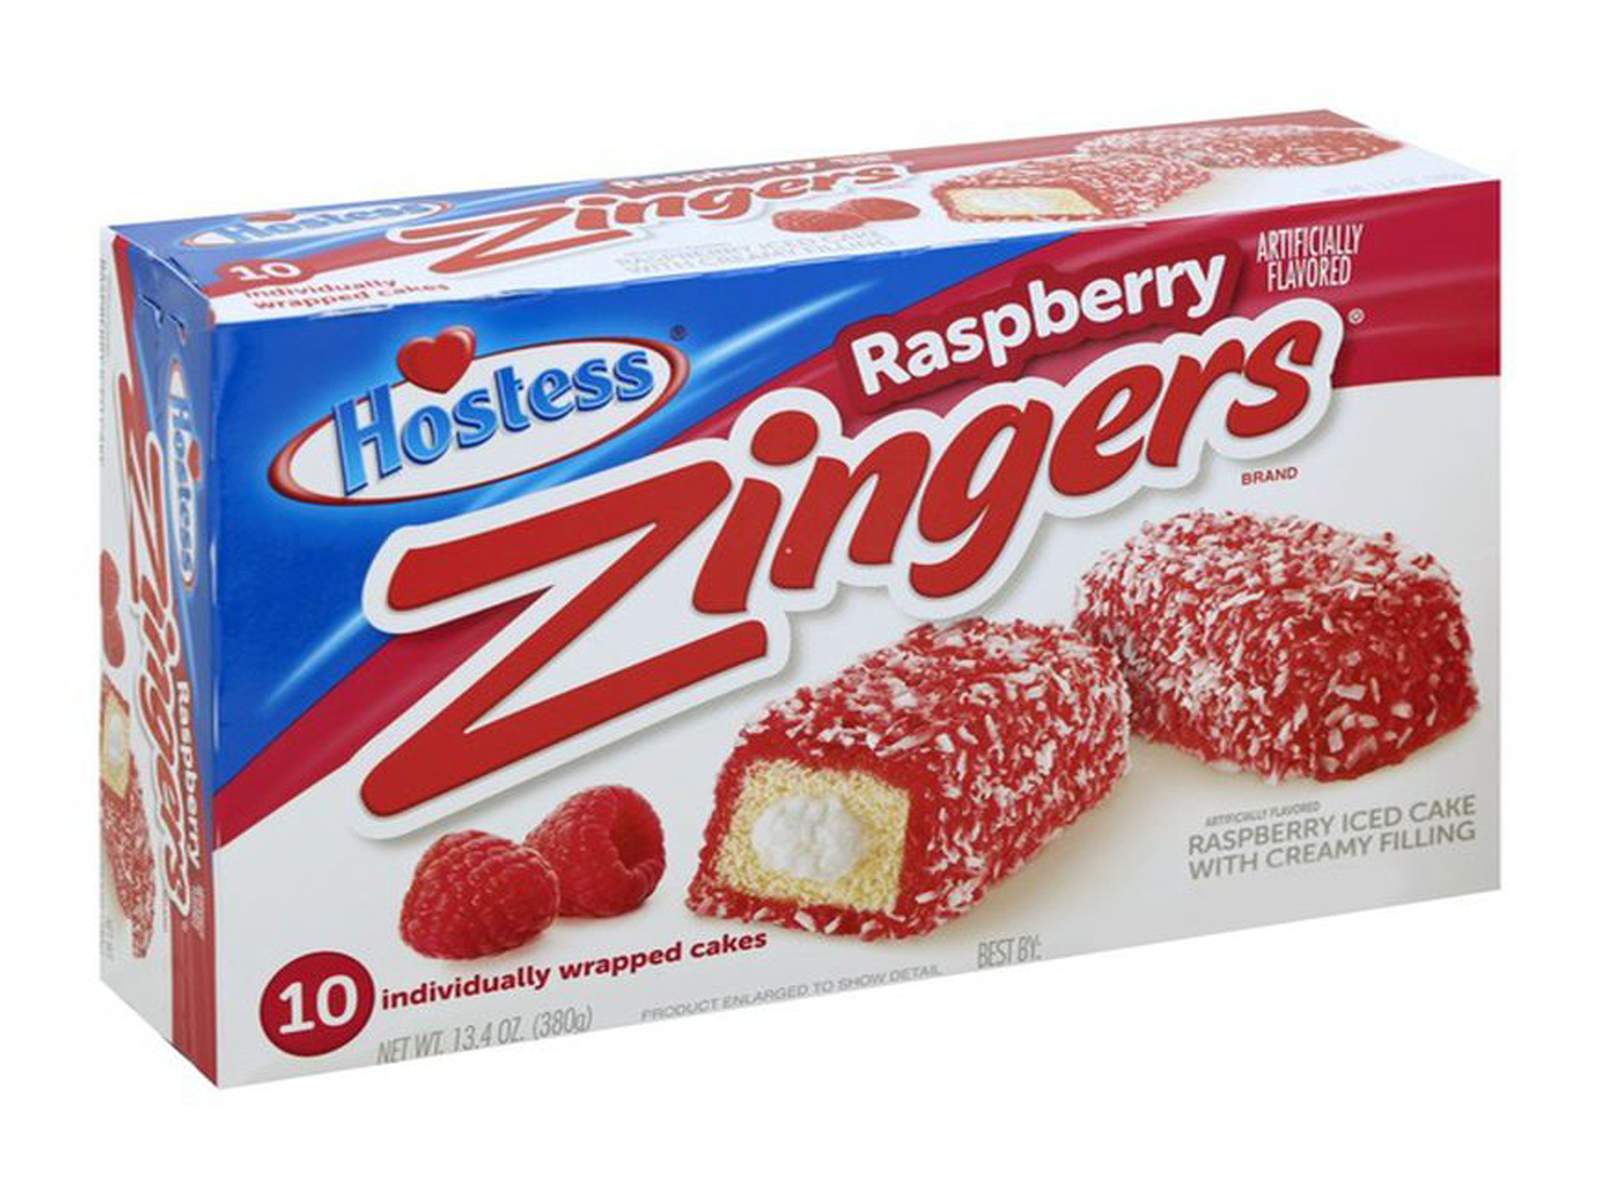 Hostess Brands issue recall on certain products due to potential for mold